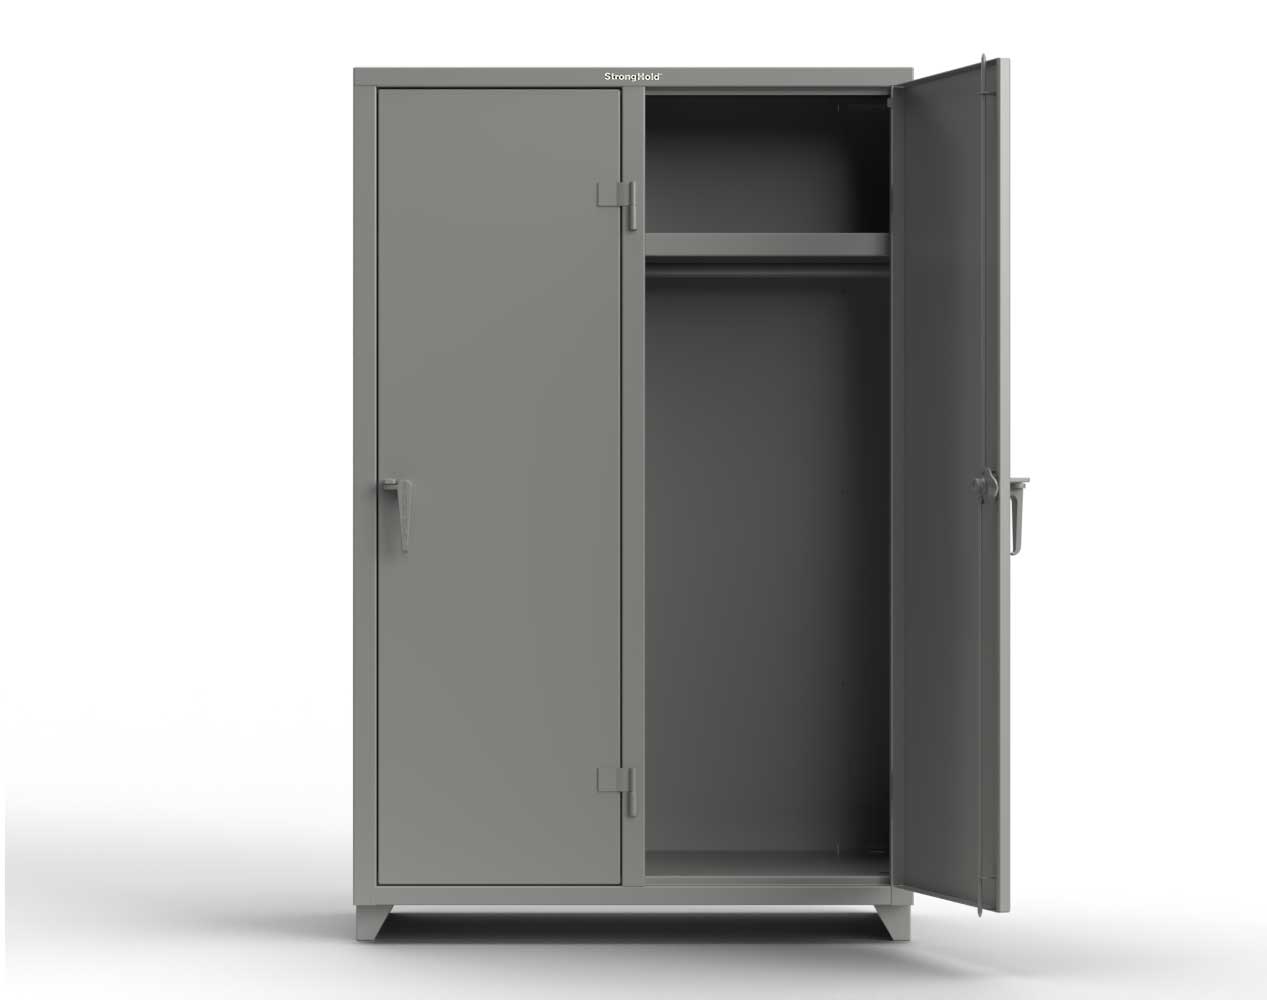 Extra Heavy Duty 14 GA Single-Tier Locker with Shelf and Hanger Rod, 2 Compartments - 48 in. W x 24 in. D x 75 in. H